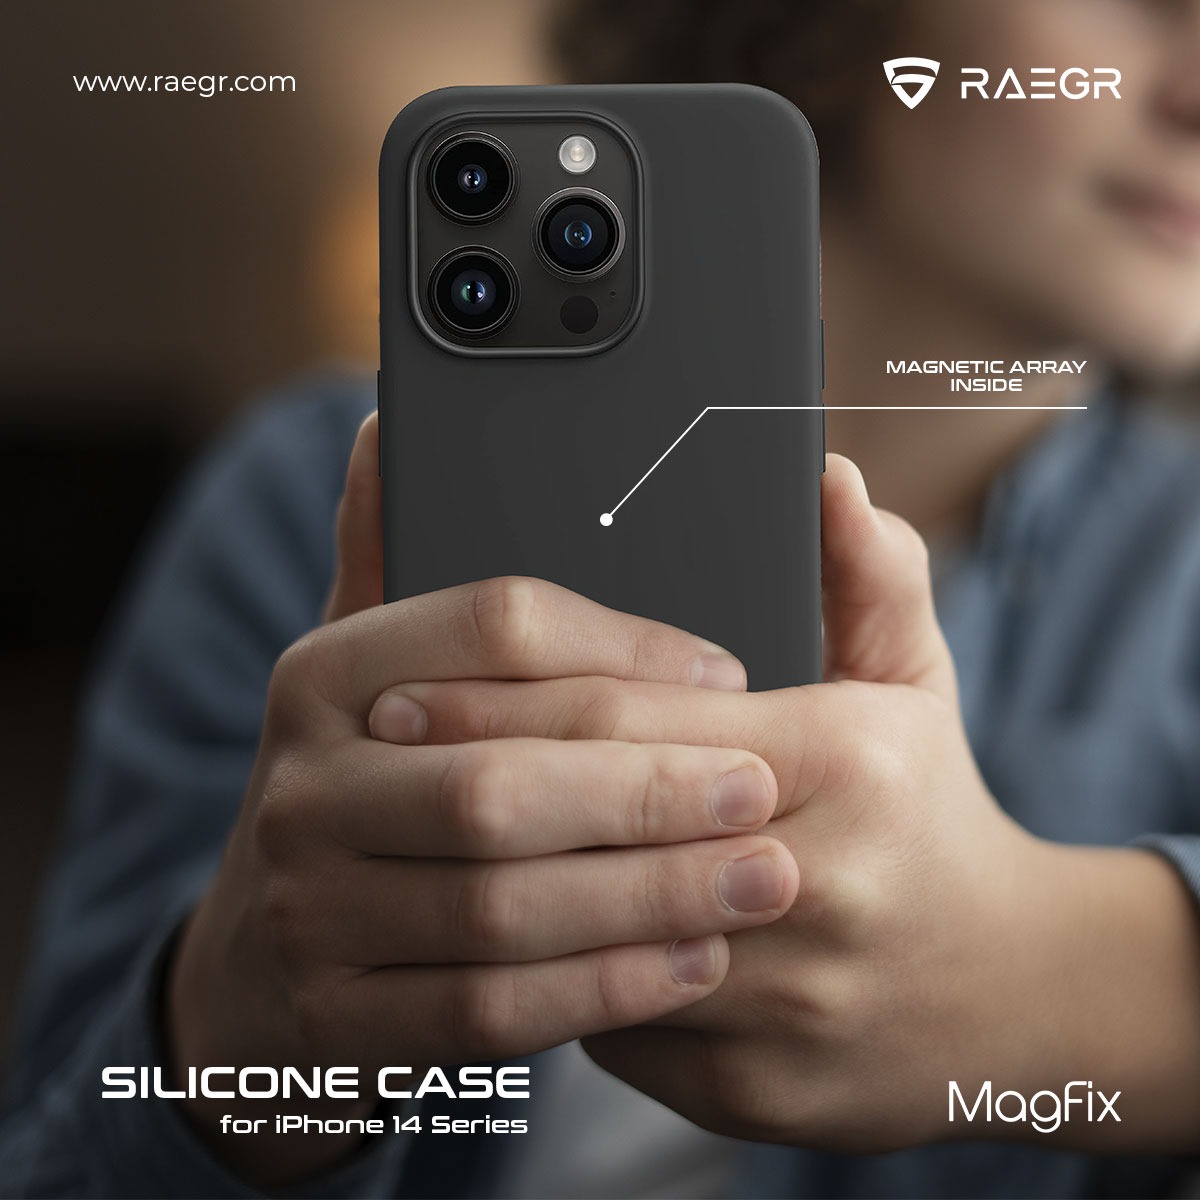 The RAEGR MagFix Silicone Case for iPhone 14 Plus is the triple threat teammate your iPhone 14 Plus deserves. Get yours today! 

Buy Now!
Raegr: postly.app/3Bhs
Tekkitake:postly.app/3Bht
Amazon:postly.app/3Bhu

#RAEGR #iPhone14Case  #MagFixCase #Silicone